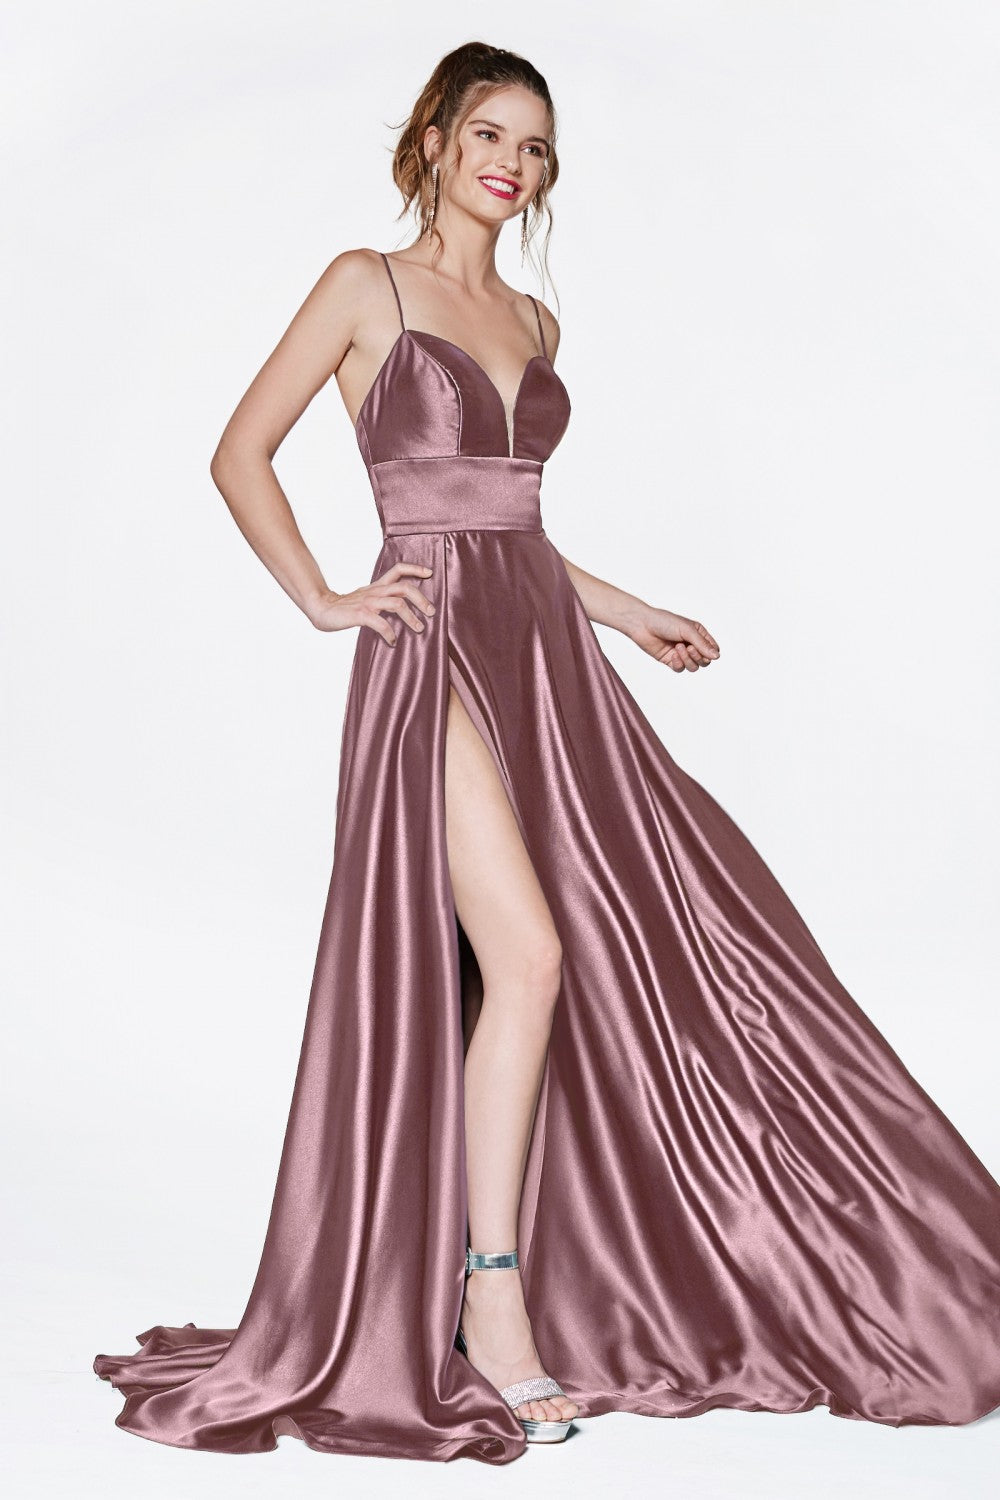 MyFashion.com - A-line gown with deep sweetheart neckline and leg slit.(CJ523) - Cinderella Divine promdress eveningdress fashion partydress weddingdress 
 gown homecoming promgown weddinggown 